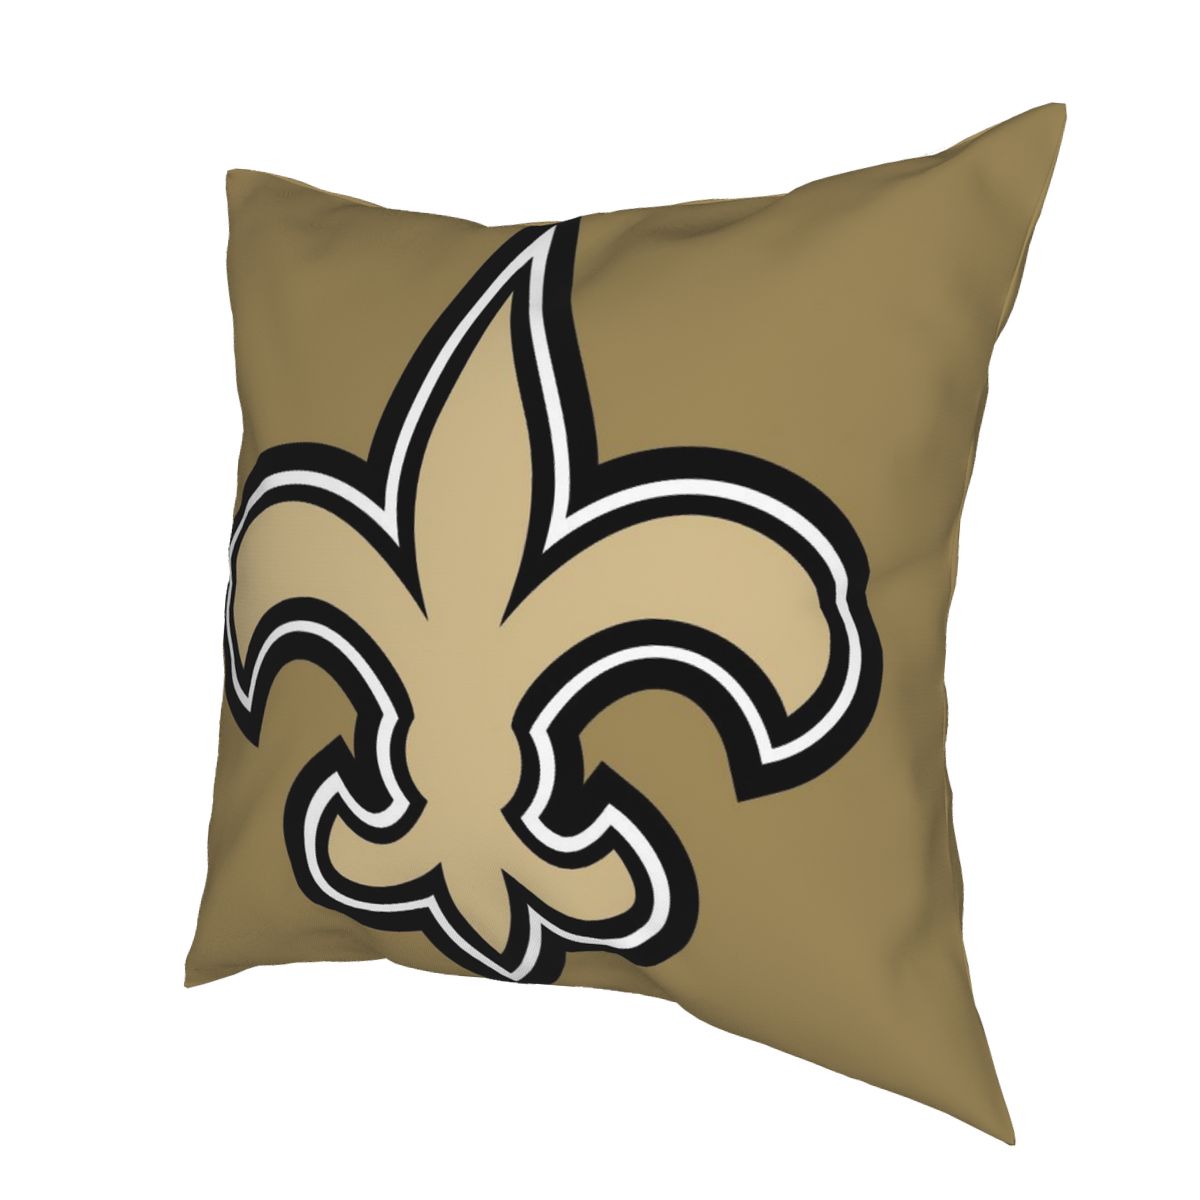 Custom Decorative Football Pillow Case New Orleans Saints Gold Pillowcase Personalized Throw Pillow Covers